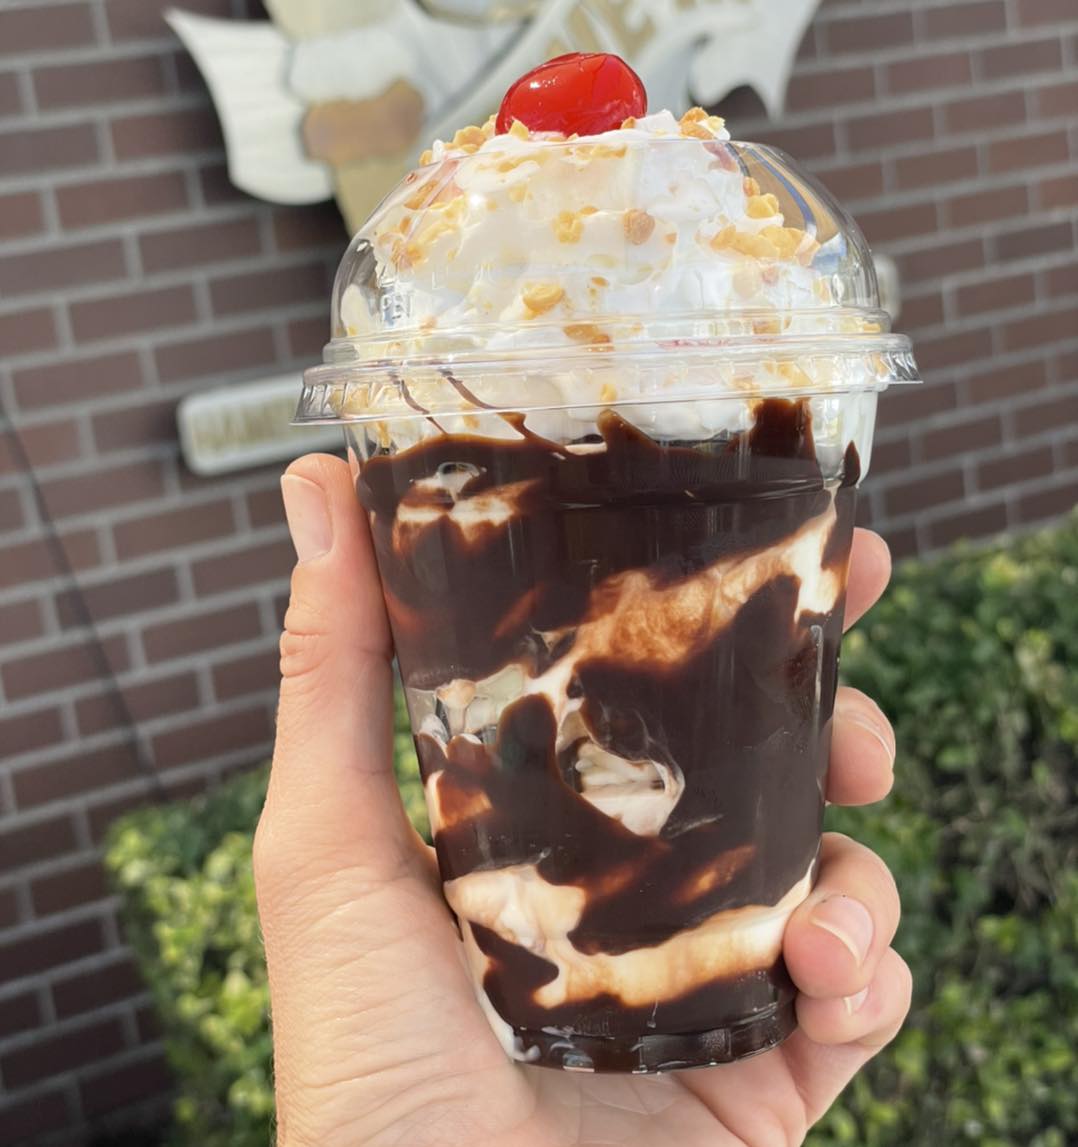 A chocolate milkshake with whip cream and a cherry on top from Big Jim's Drive In.